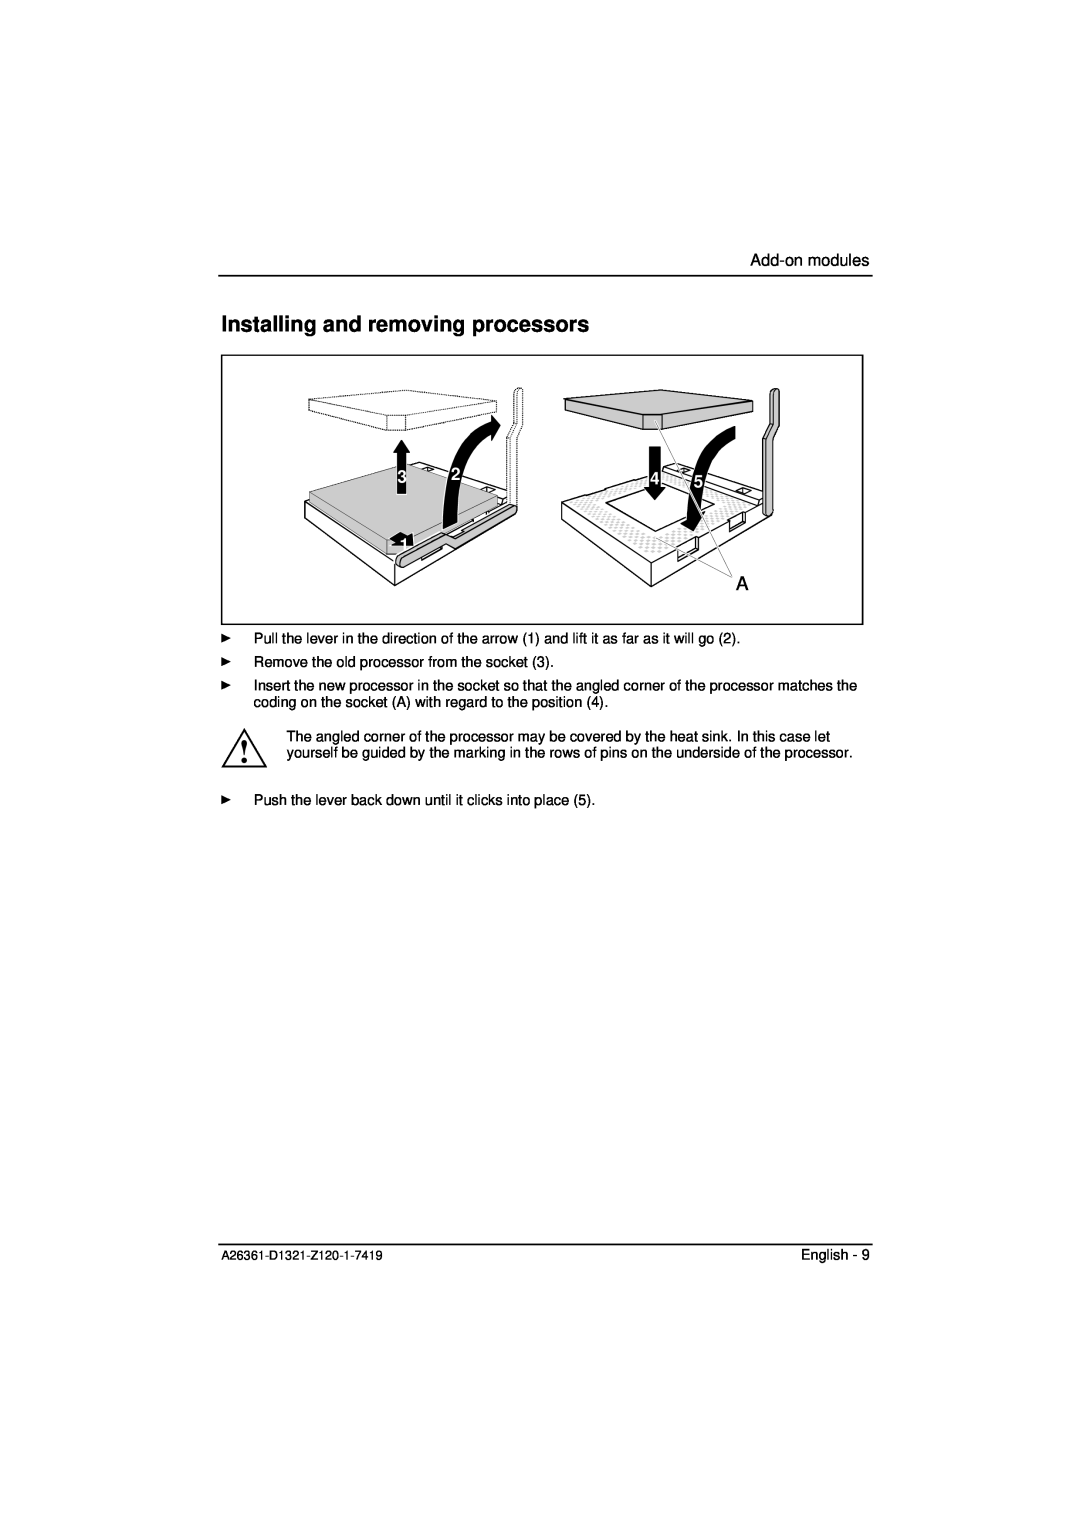 Fujitsu D1321 technical manual Installing and removing processors, Add-on modules 